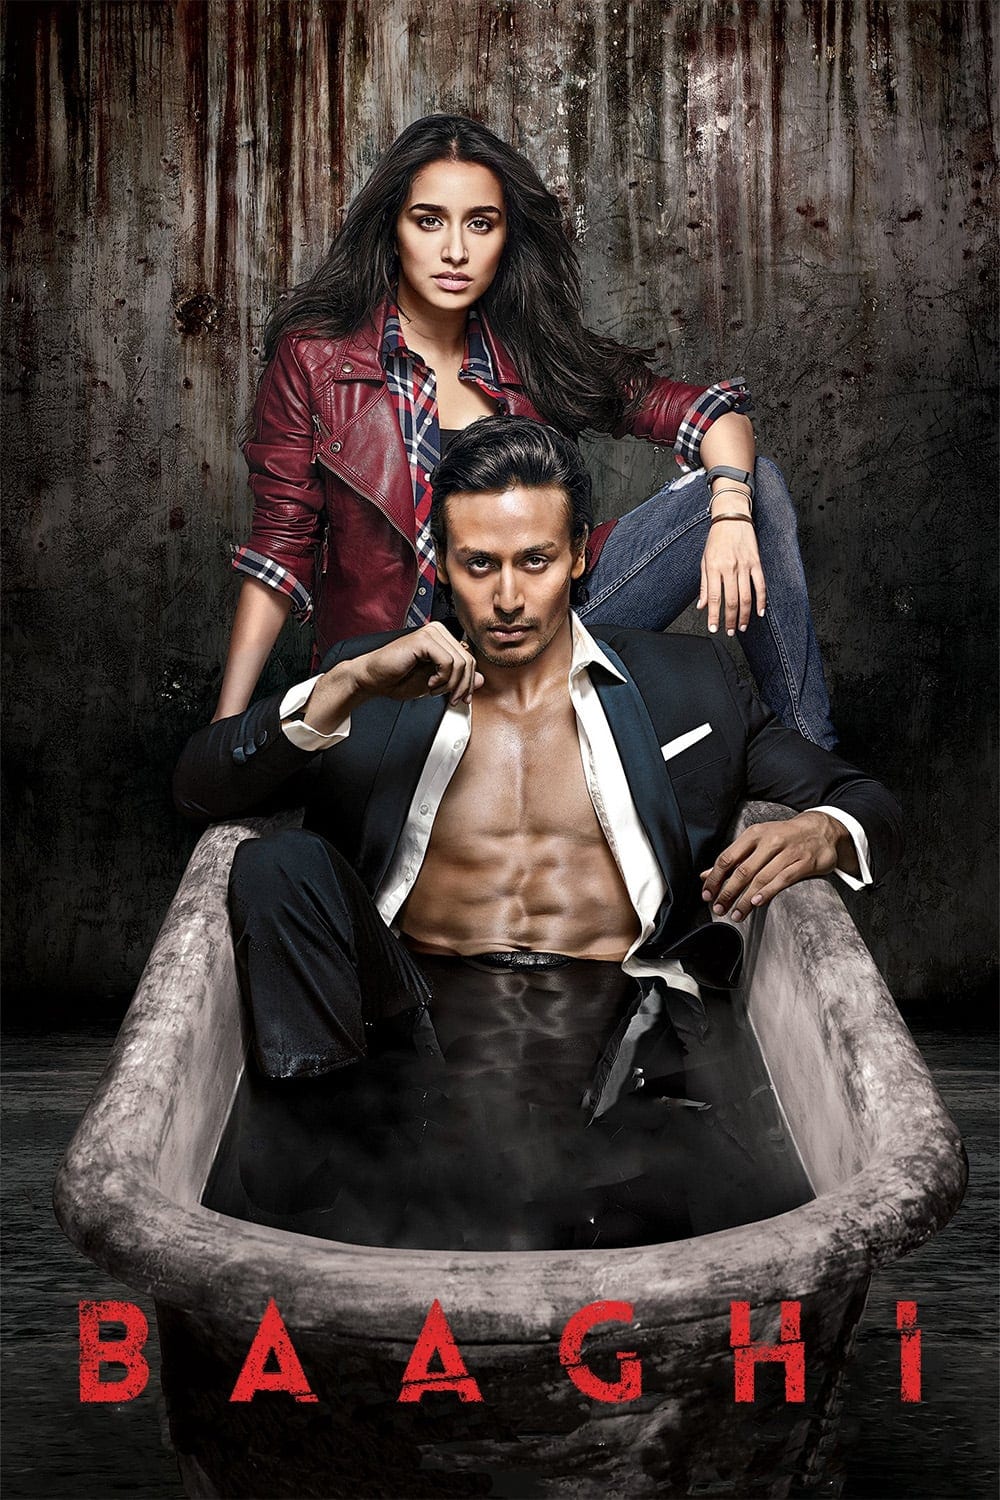 Poster for the movie "Baaghi"